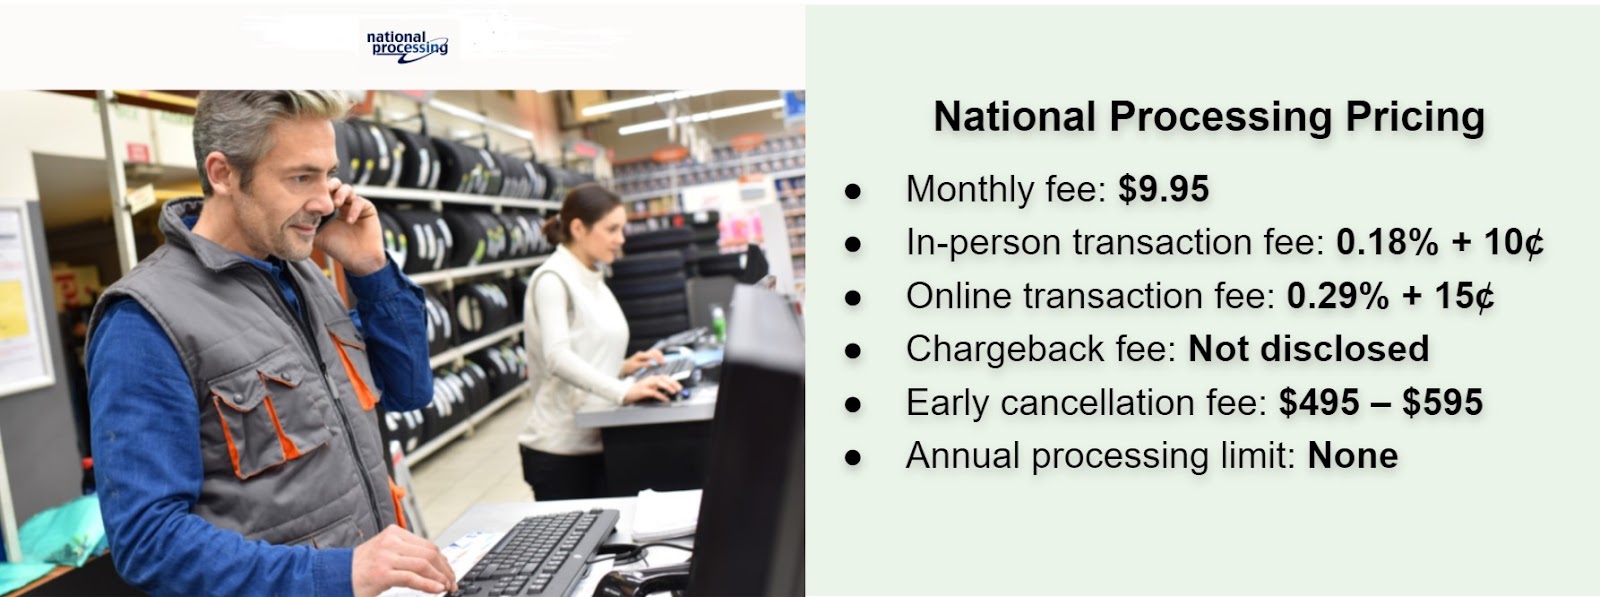 National Processing plan pricing and fees.